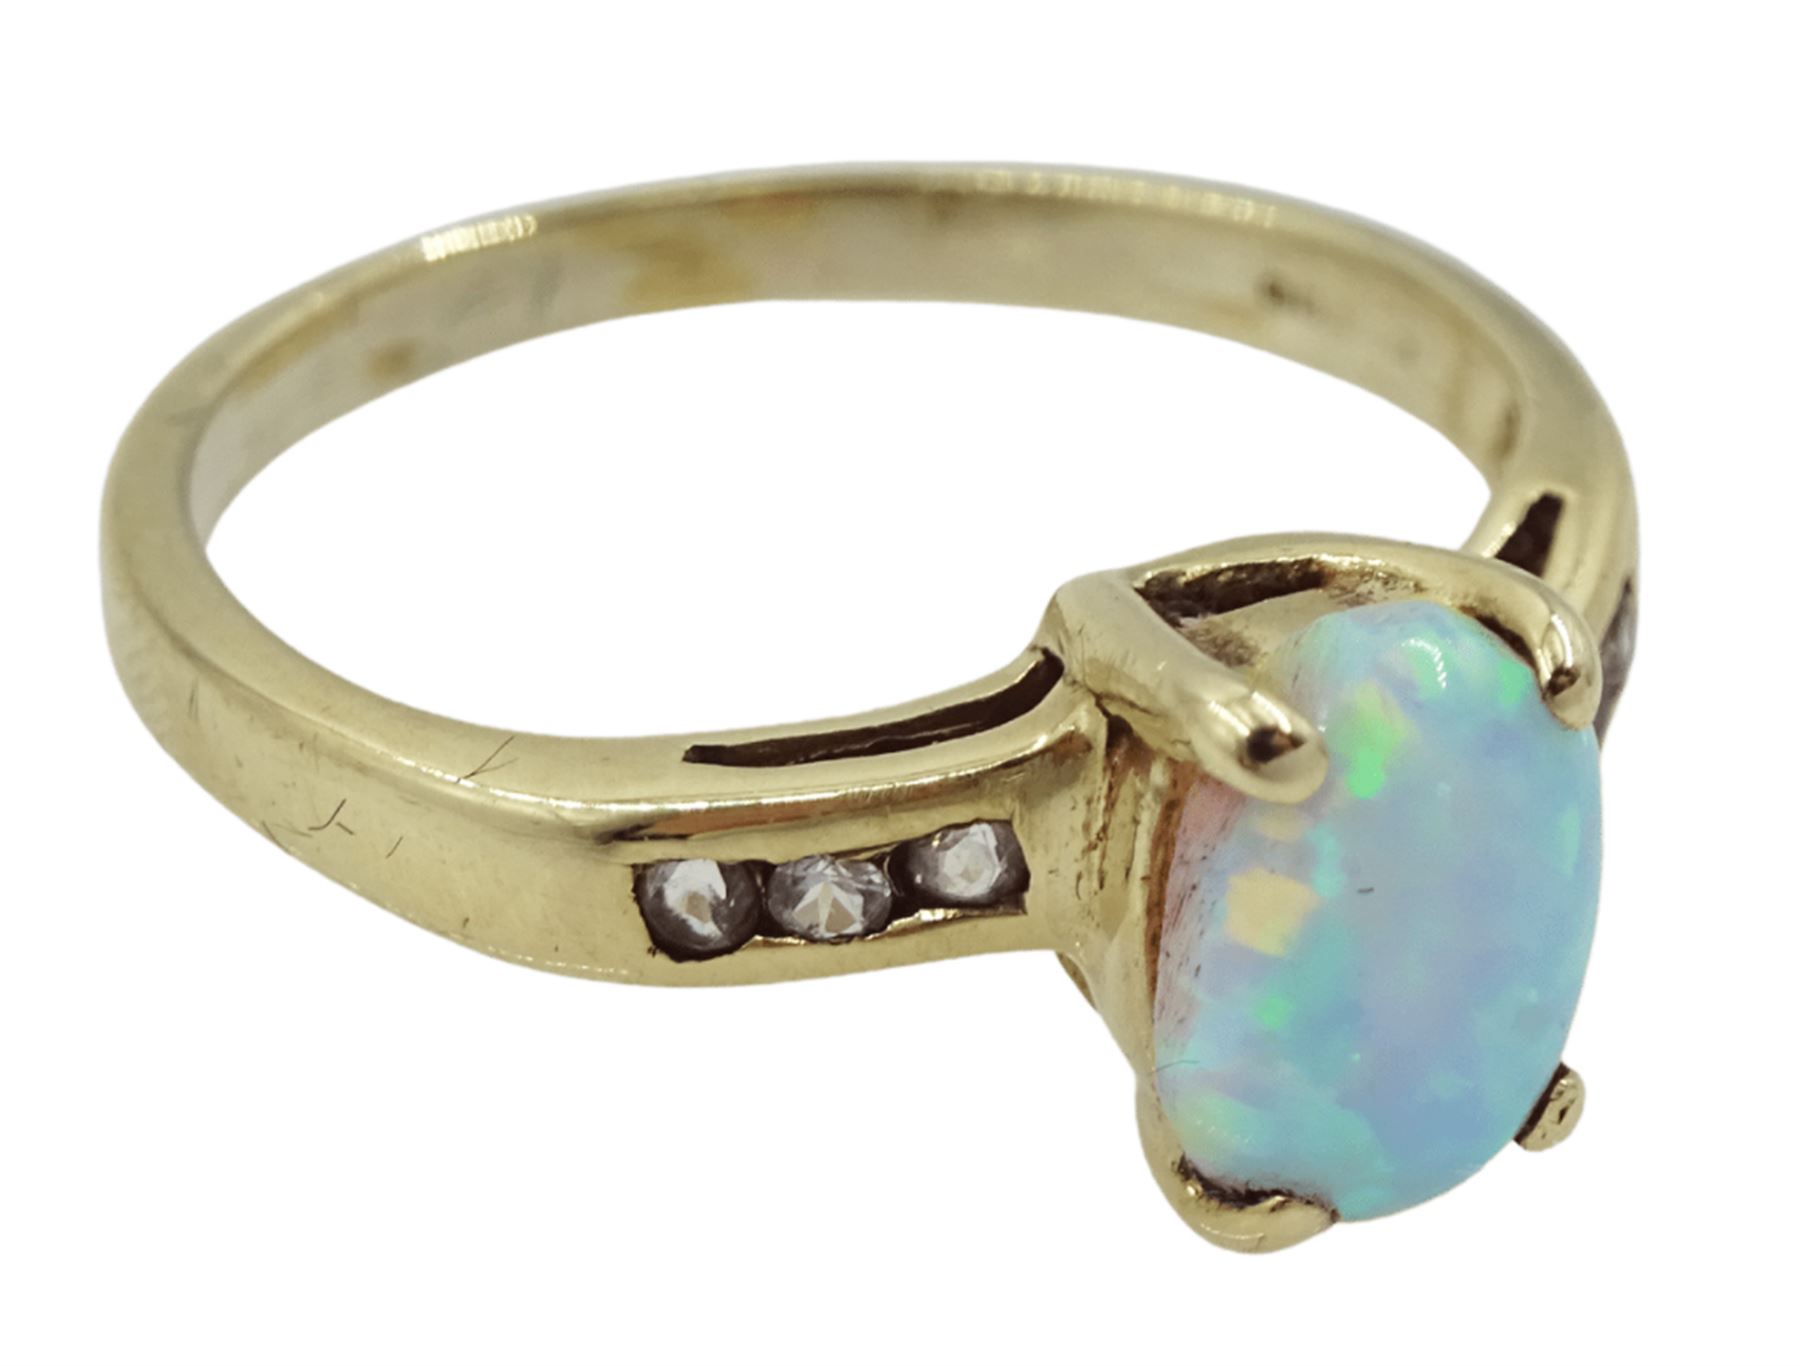 9ct gold single stone oval opal ring with cubic zirconia set shoulders - Image 3 of 4